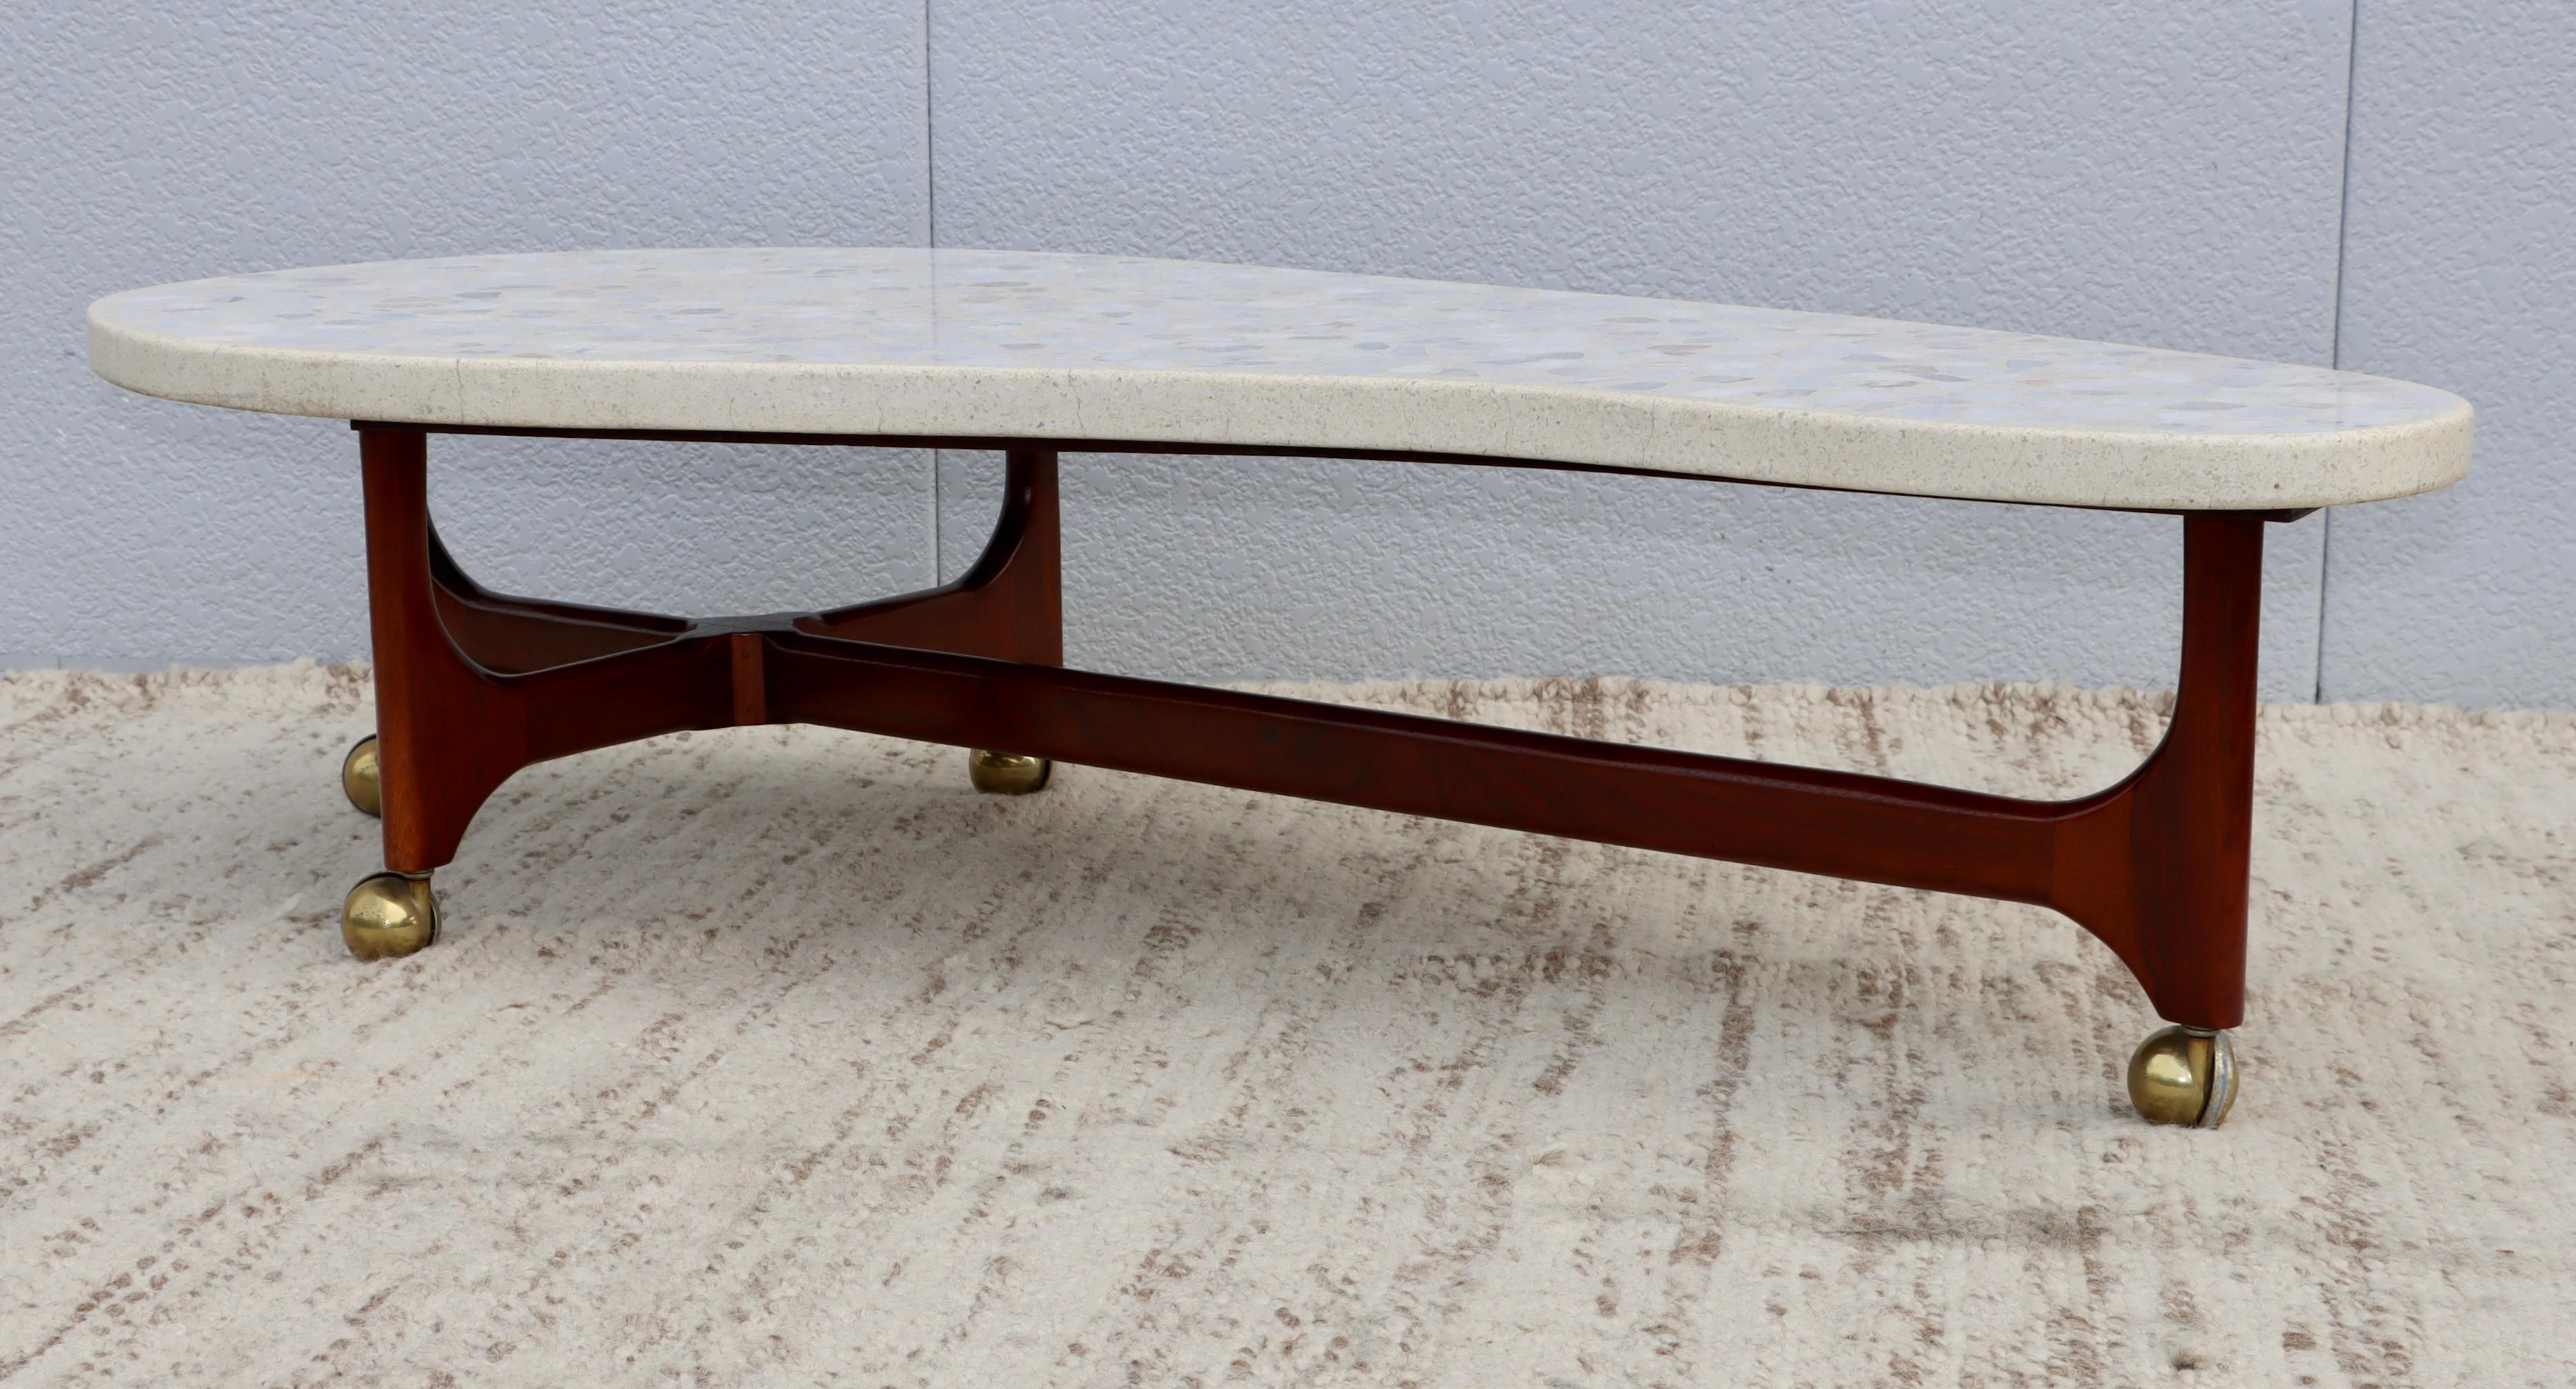 1960's mid-century modern organic shape terrazzo top with walnut base coffee table in the style of Harvey Probber, lightly restored with minor wear and patina due to age and use, there is some hairlines cracks along the edge of the top.